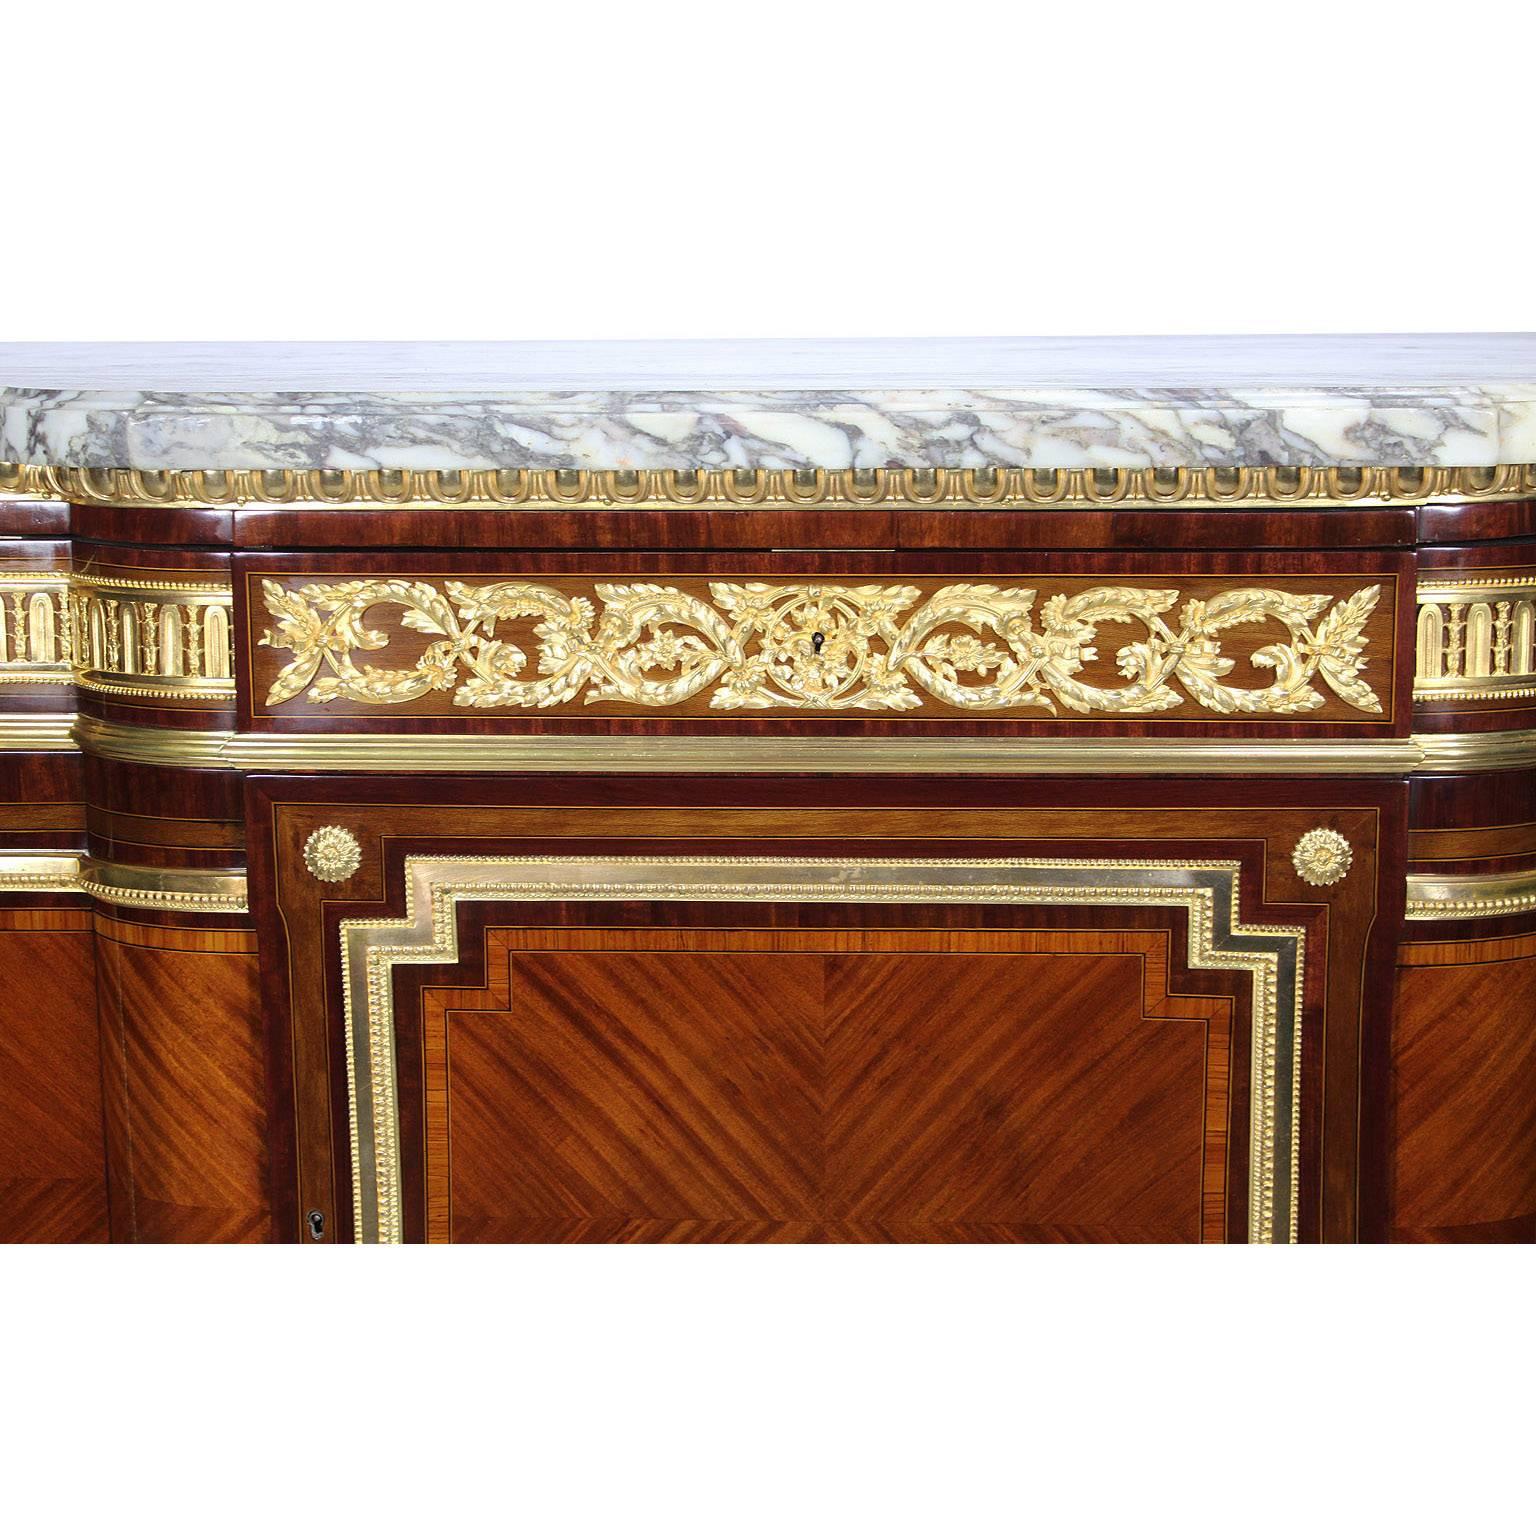 A very fine French, 19th century Louis XVI style ormolu-mounted mahogany and tulip wood commode with a brèche violette marble top, after the model by Jean-Henri Riesener (1734-1806). The mahogany body with tulip wood veneer, the frieze with three